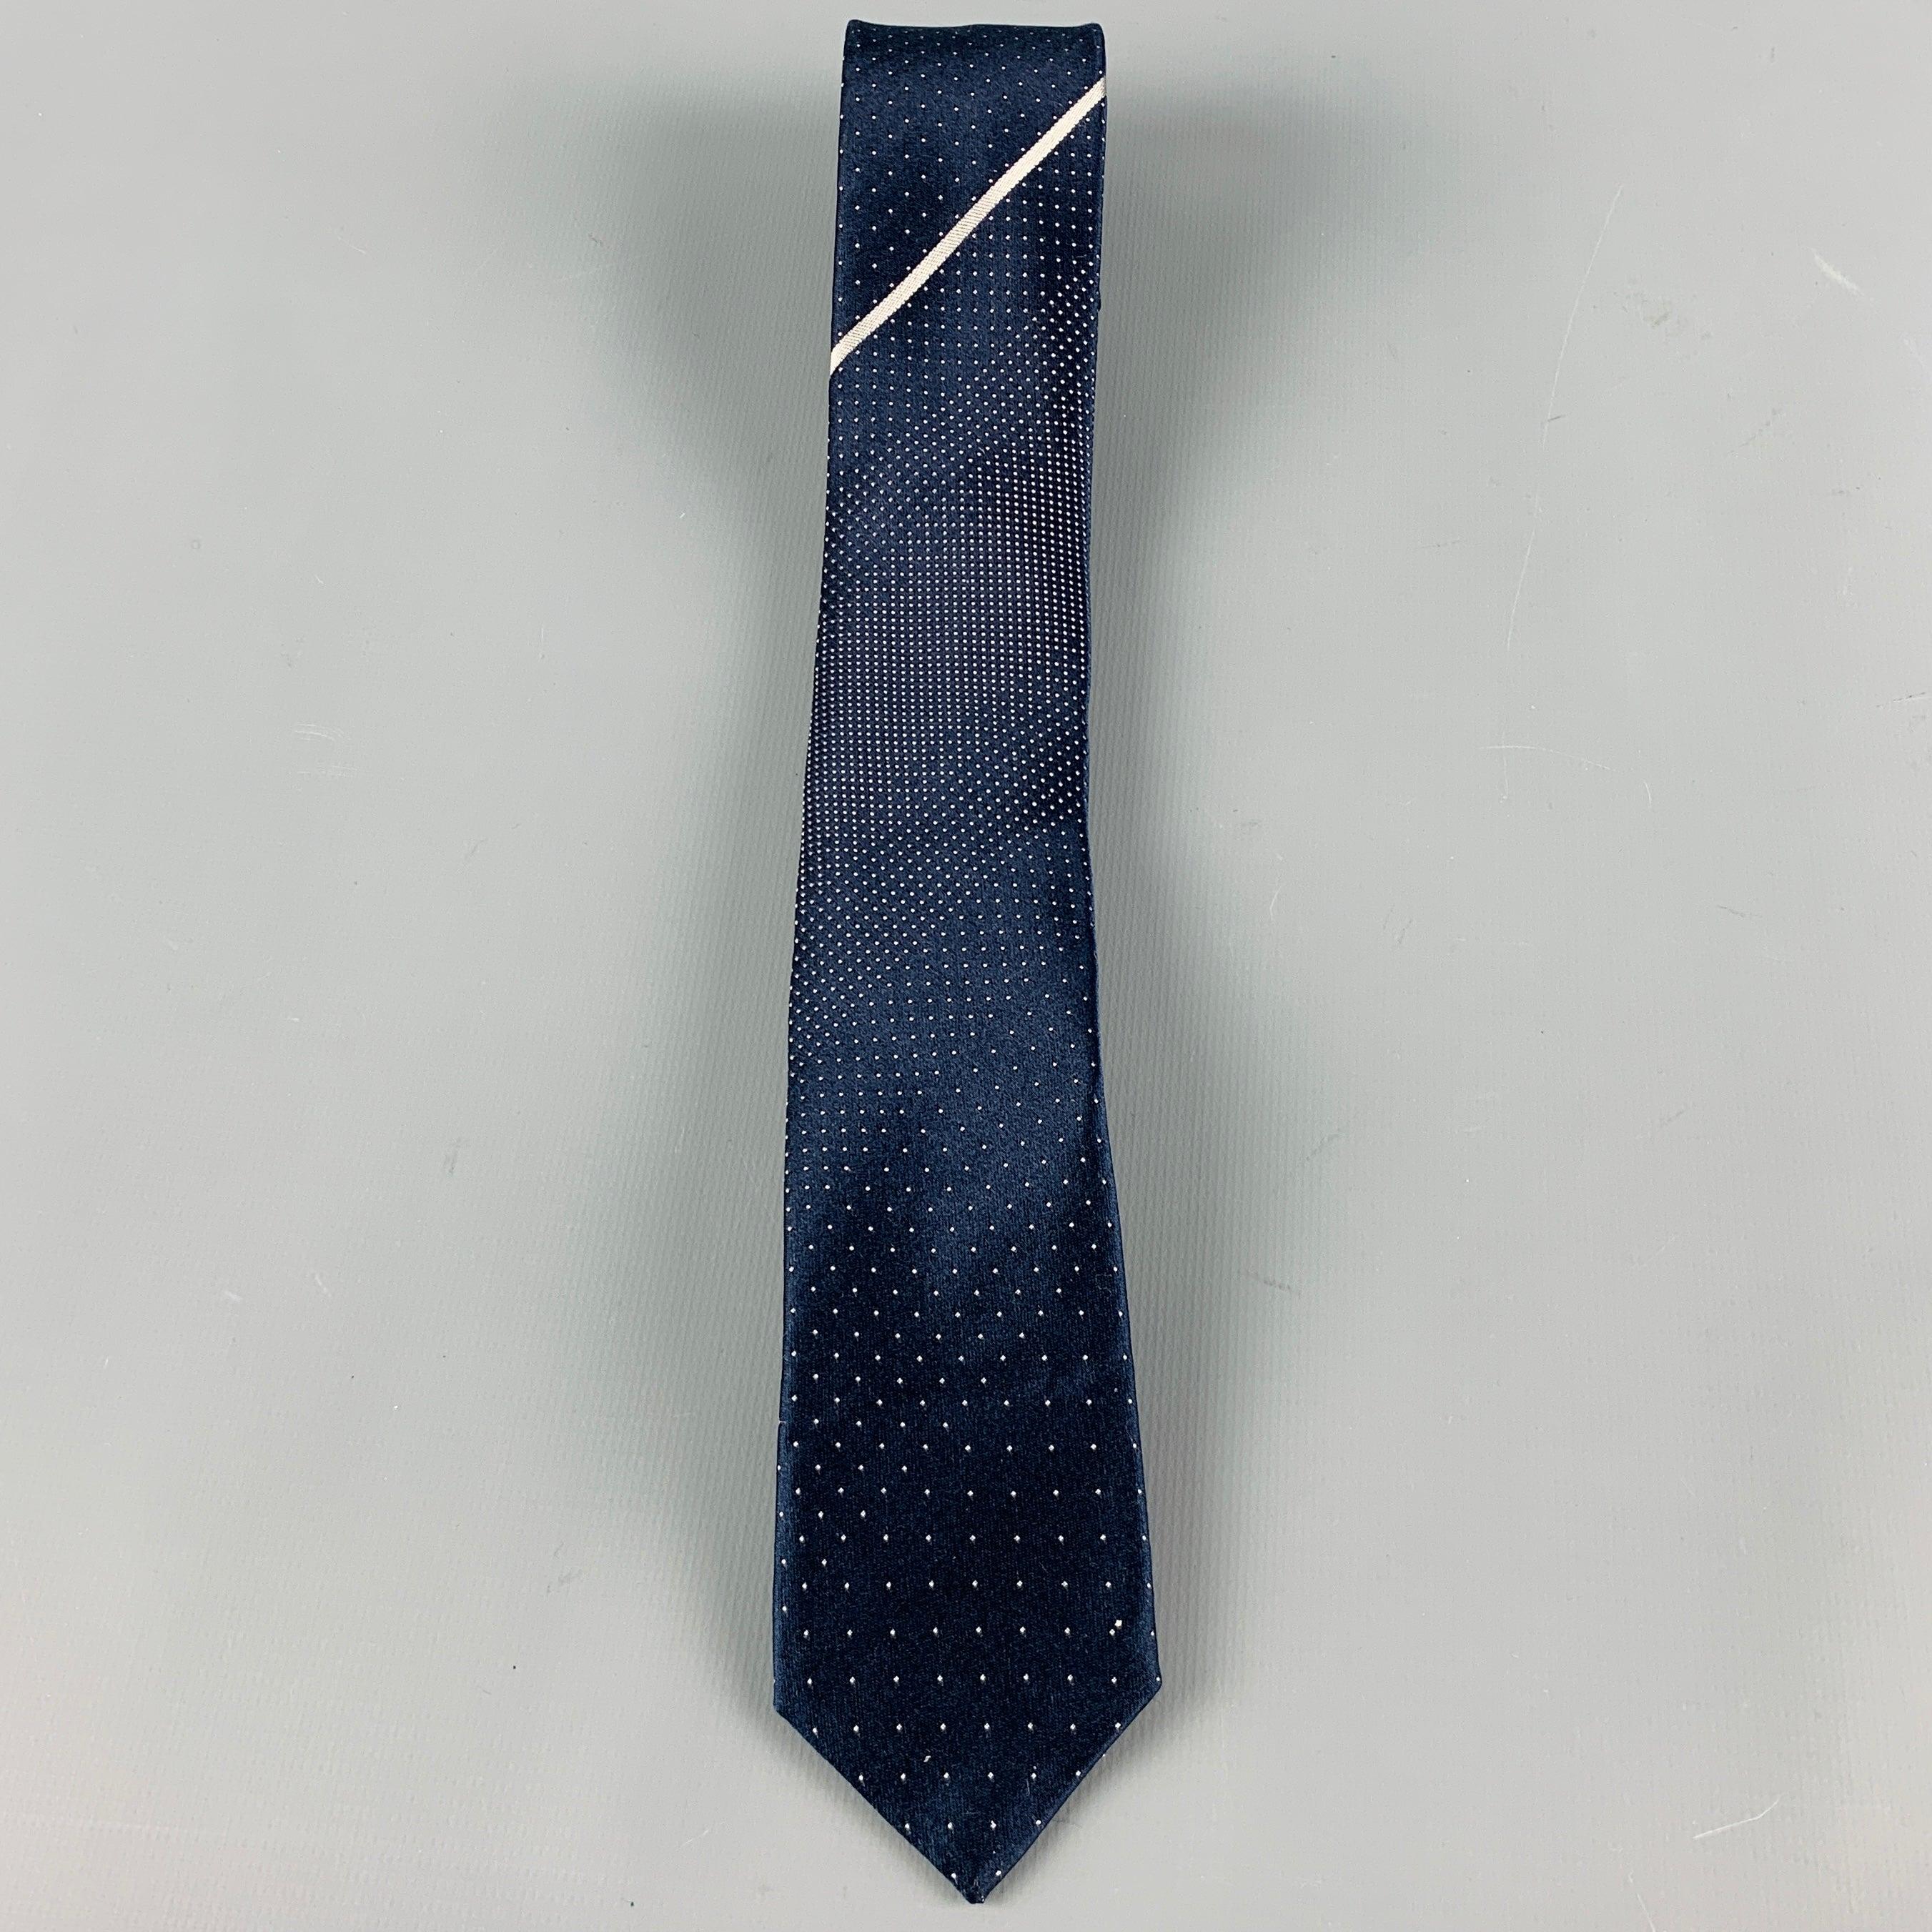 PRADA
necktie in a navy silk satin fabric featuring white dots pattern and narrow style. Made in Italy.Excellent Pre-Owned Condition. 

Measurements: 
  Width: 2 inches Length: 60 inches 
  
  
 
Reference No.: 128739
Category: Tie
More Details
   